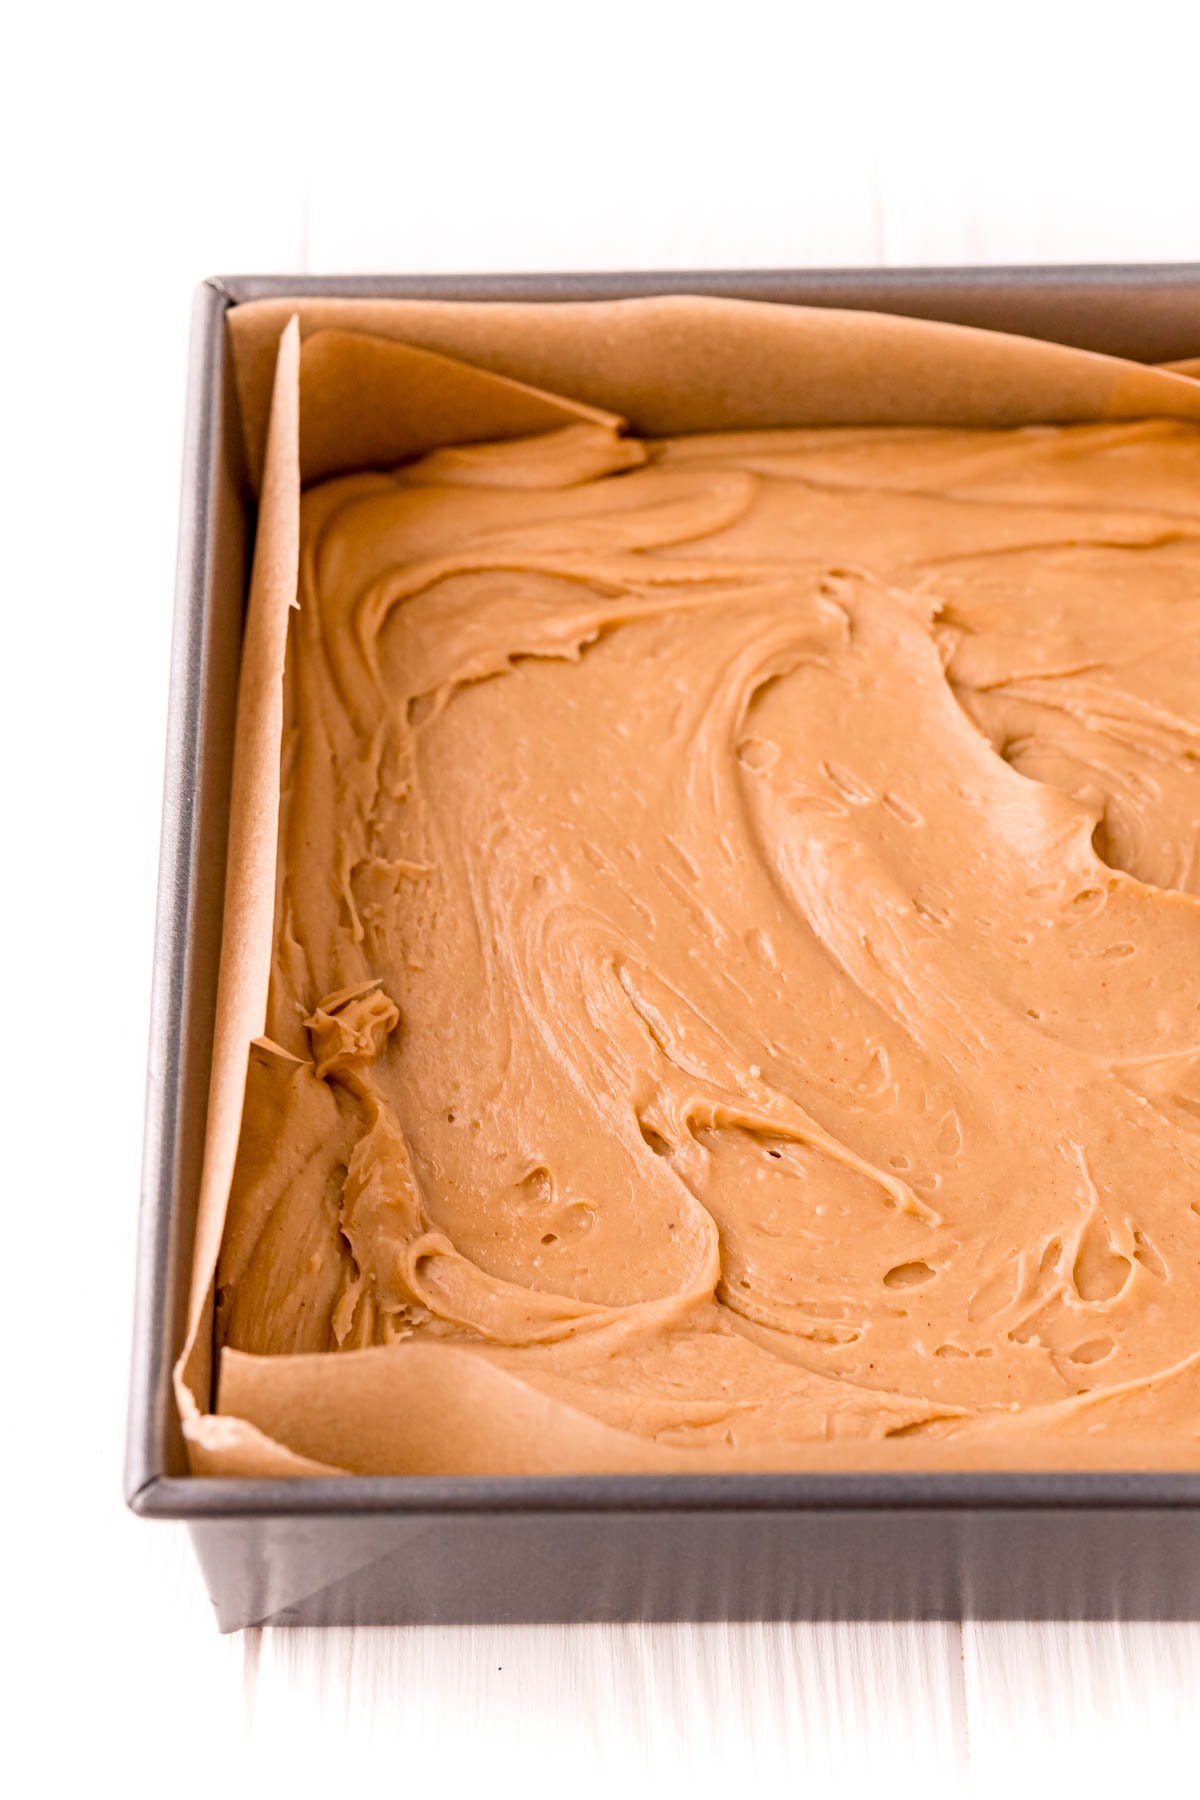 Peanut butter fudge in a baking dish lined with parchment paper.